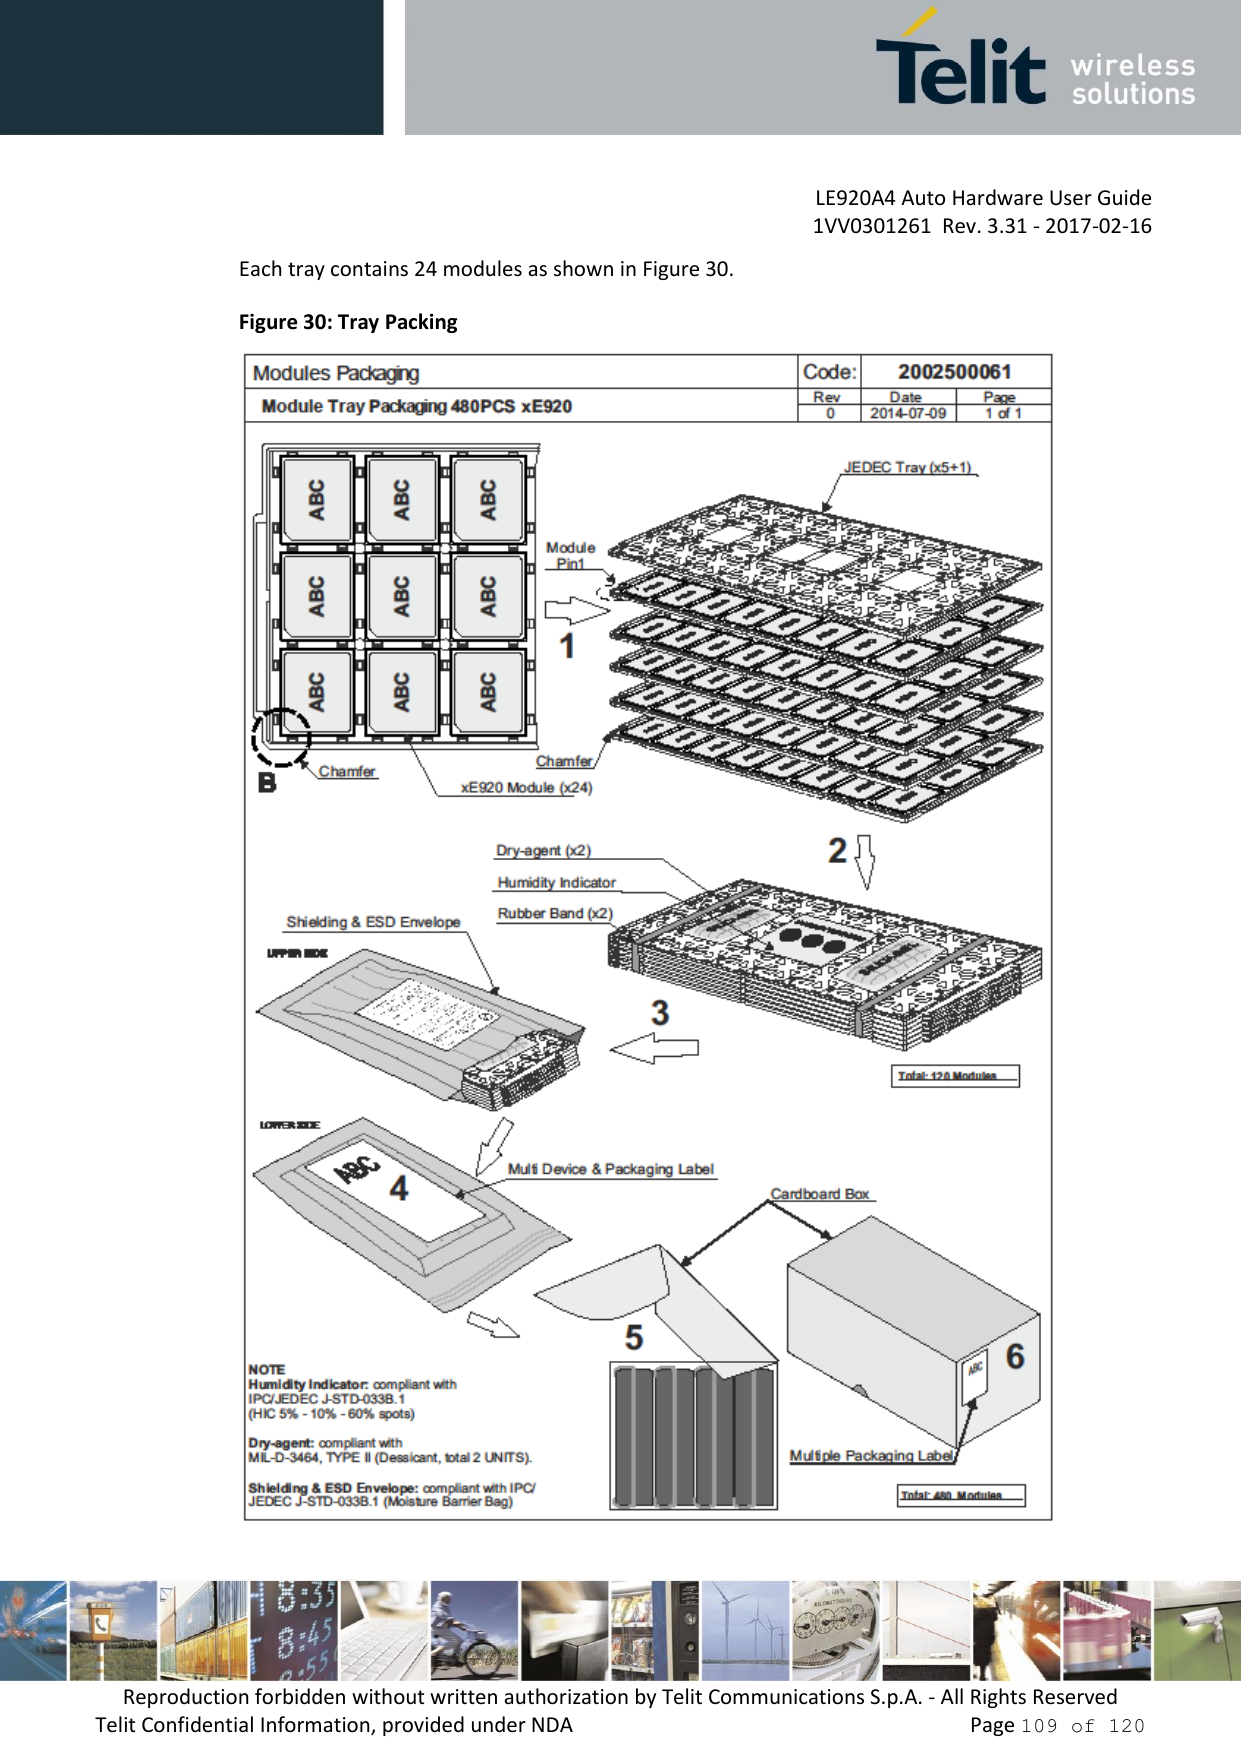 LE920A4 Auto Hardware User Guide 1VV0301261  Rev. 3.31 - 2017-02-16 Reproduction forbidden without written authorization by Telit Communications S.p.A. - All Rights Reserved Telit Confidential Information, provided under NDA   Page 109 of 120 Each tray contains 24 modules as shown in Figure 30. Figure 30: Tray Packing 